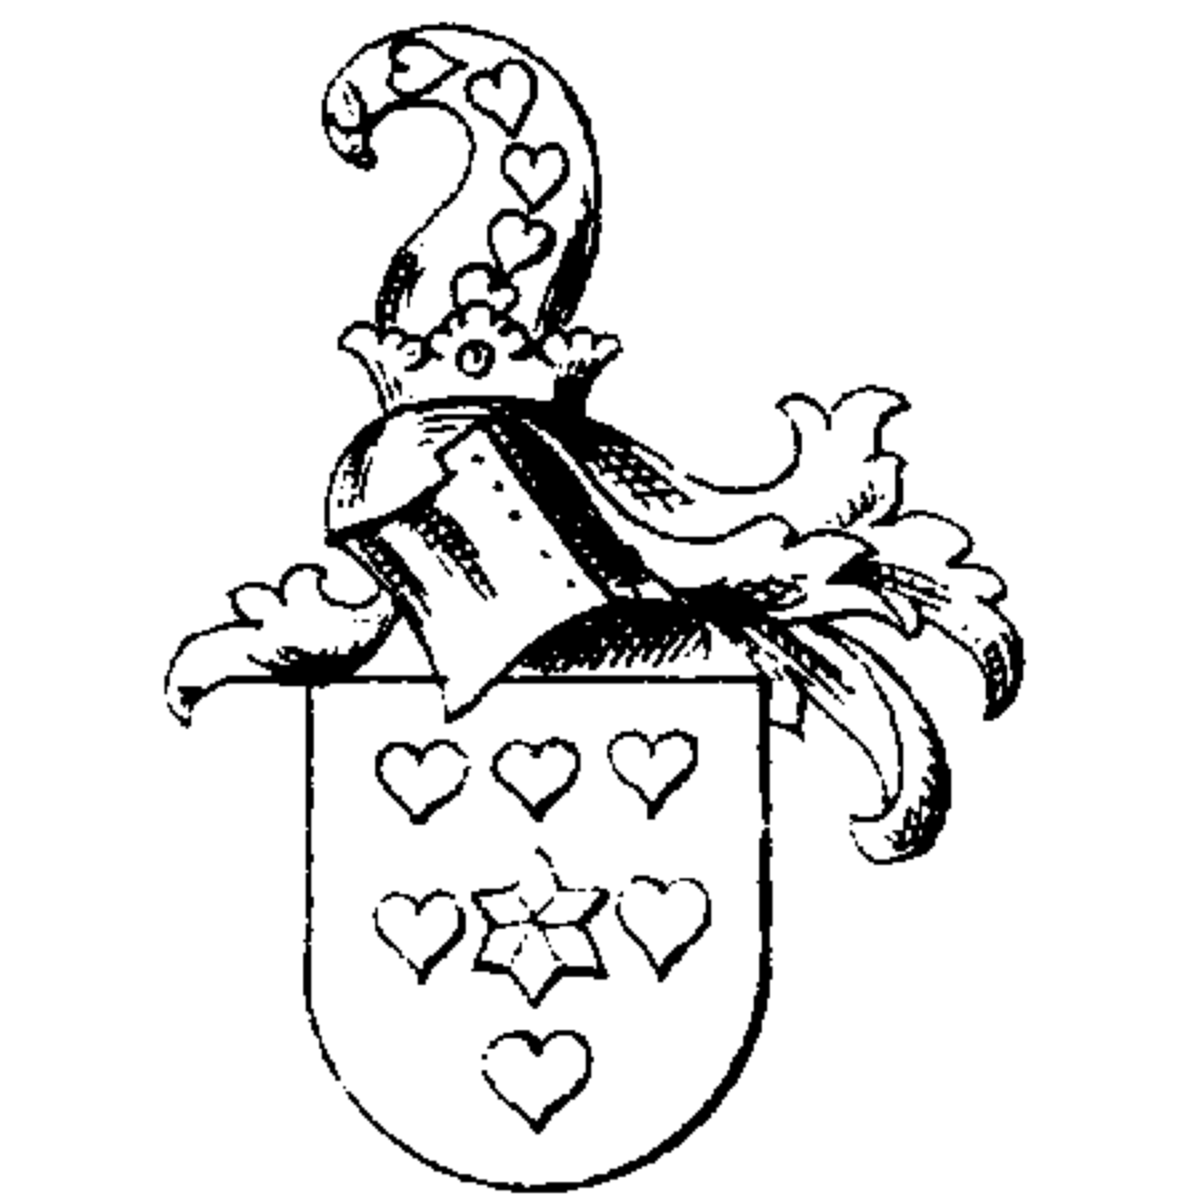 Coat of arms of family Lafontaine